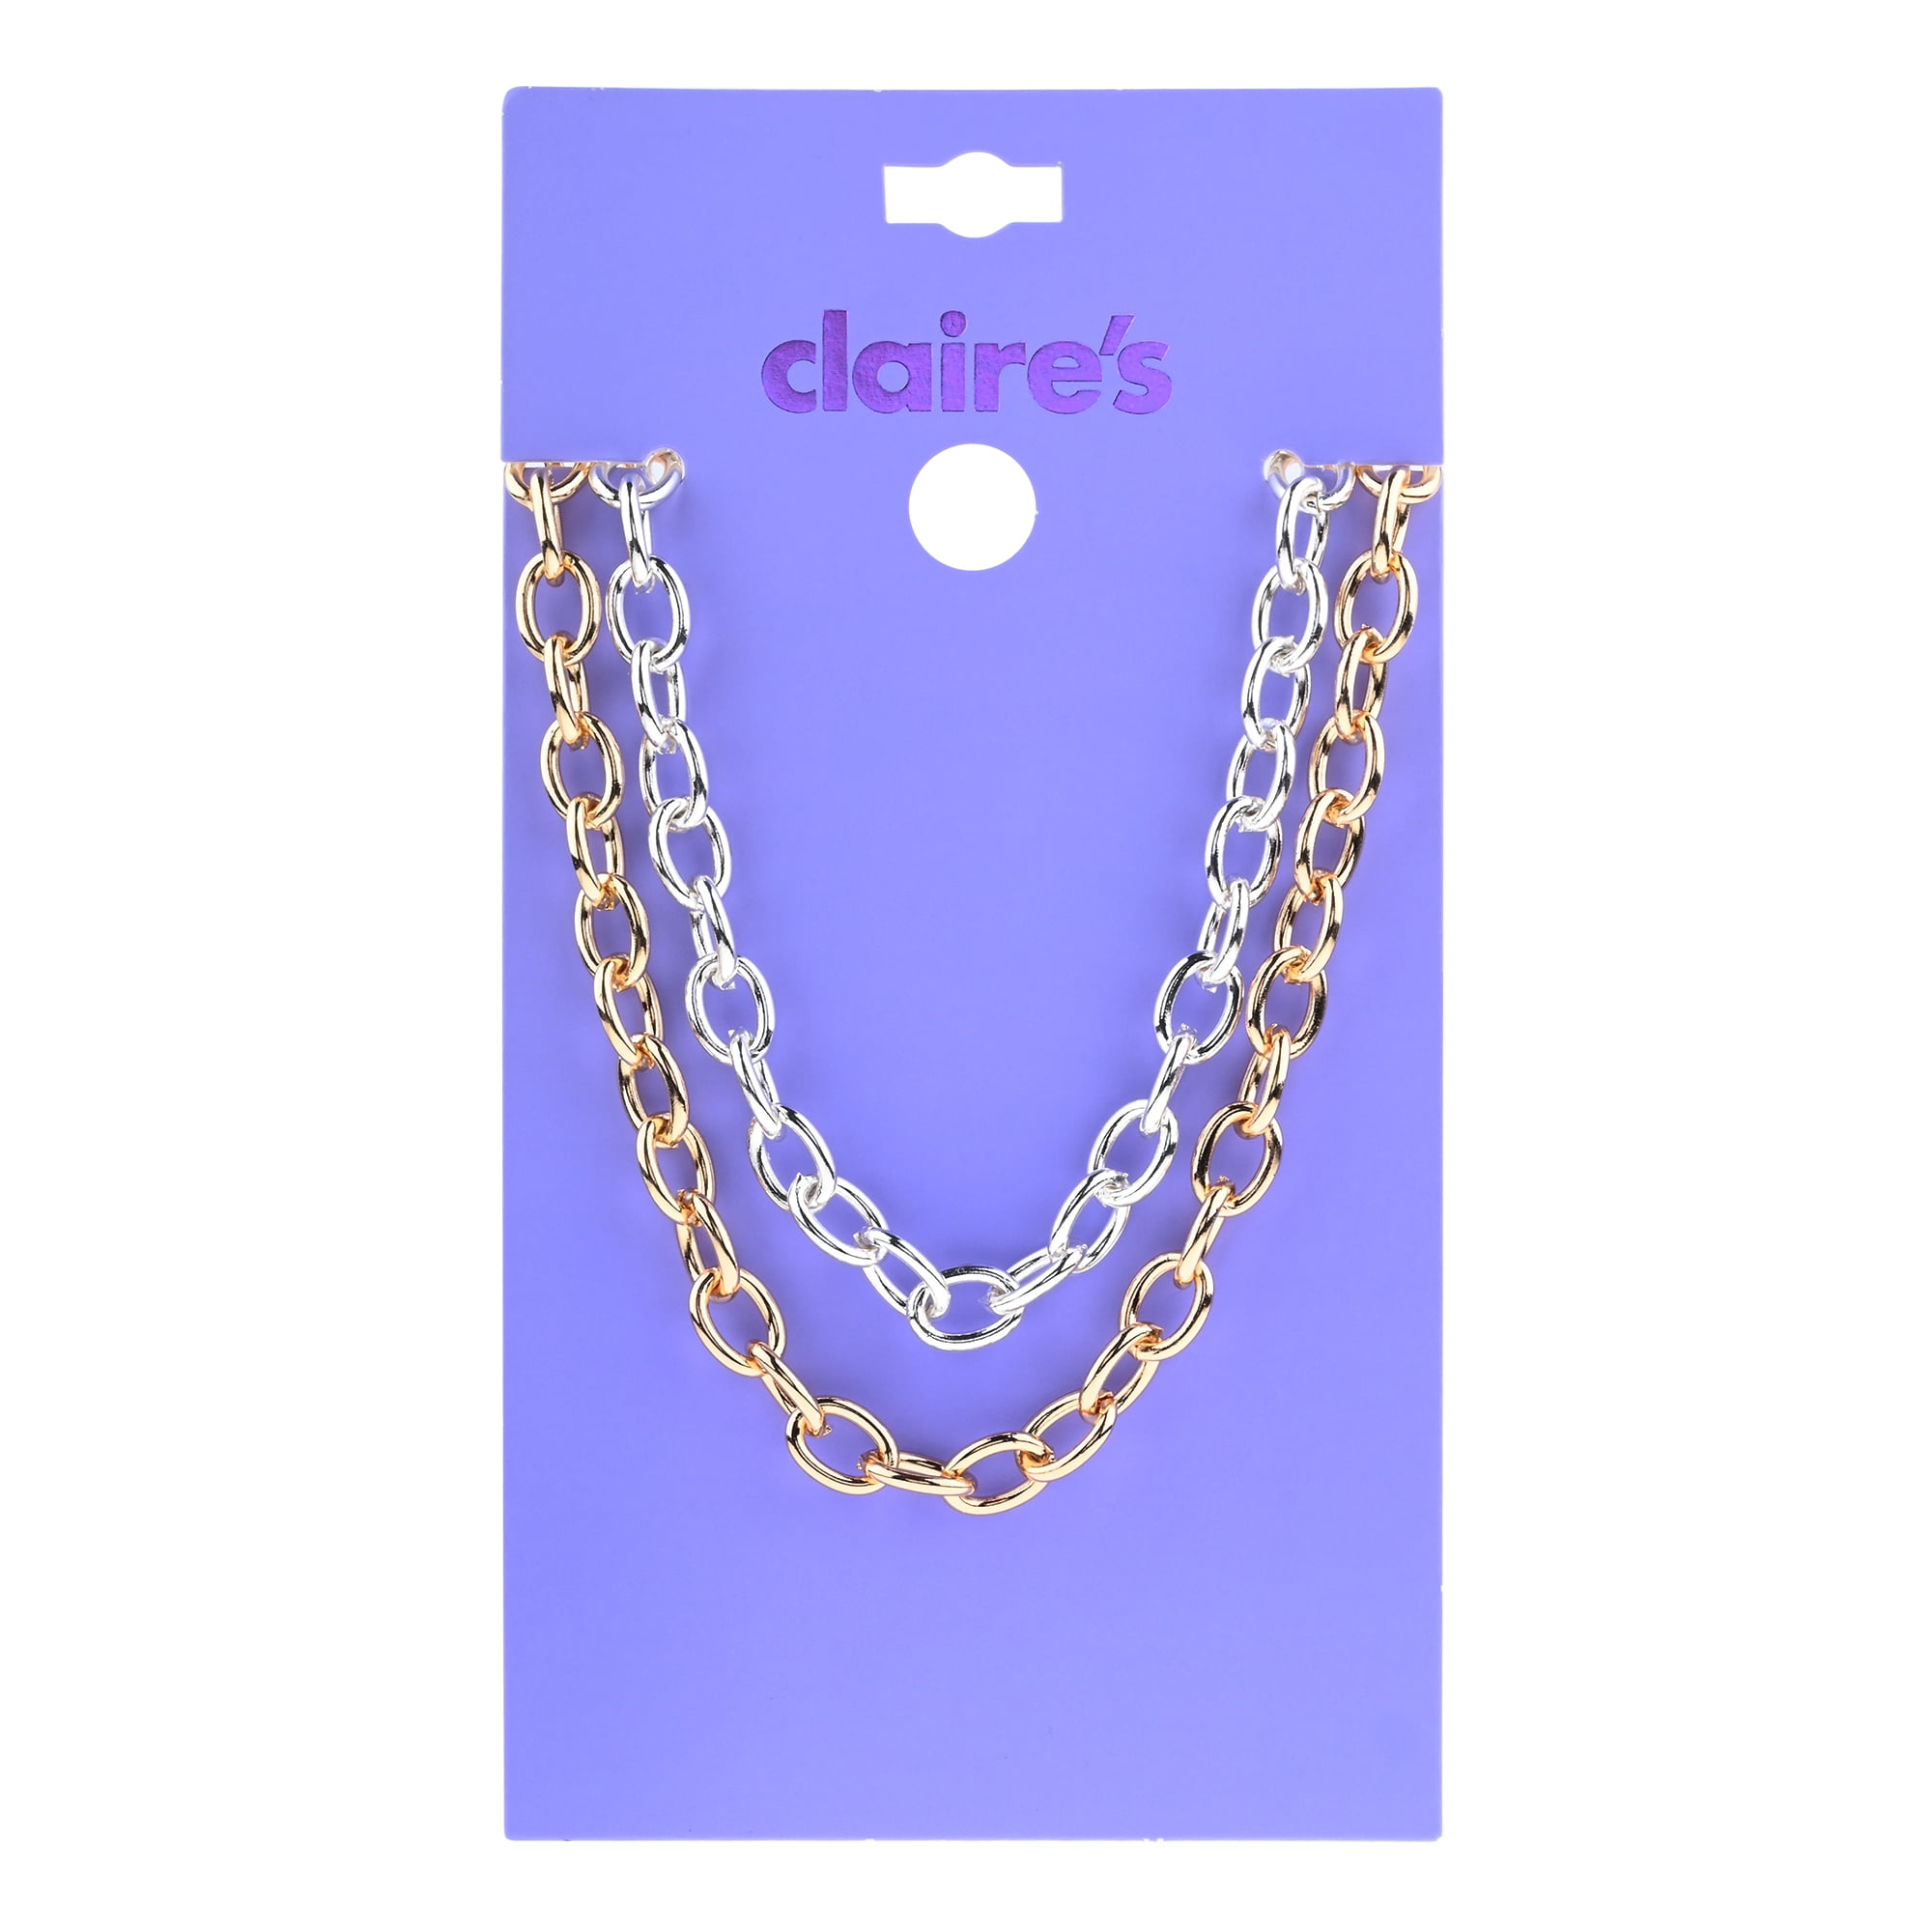 Claire's Tween Girls Gold and Silver Chain Necklaces Jewelry - 2 Each